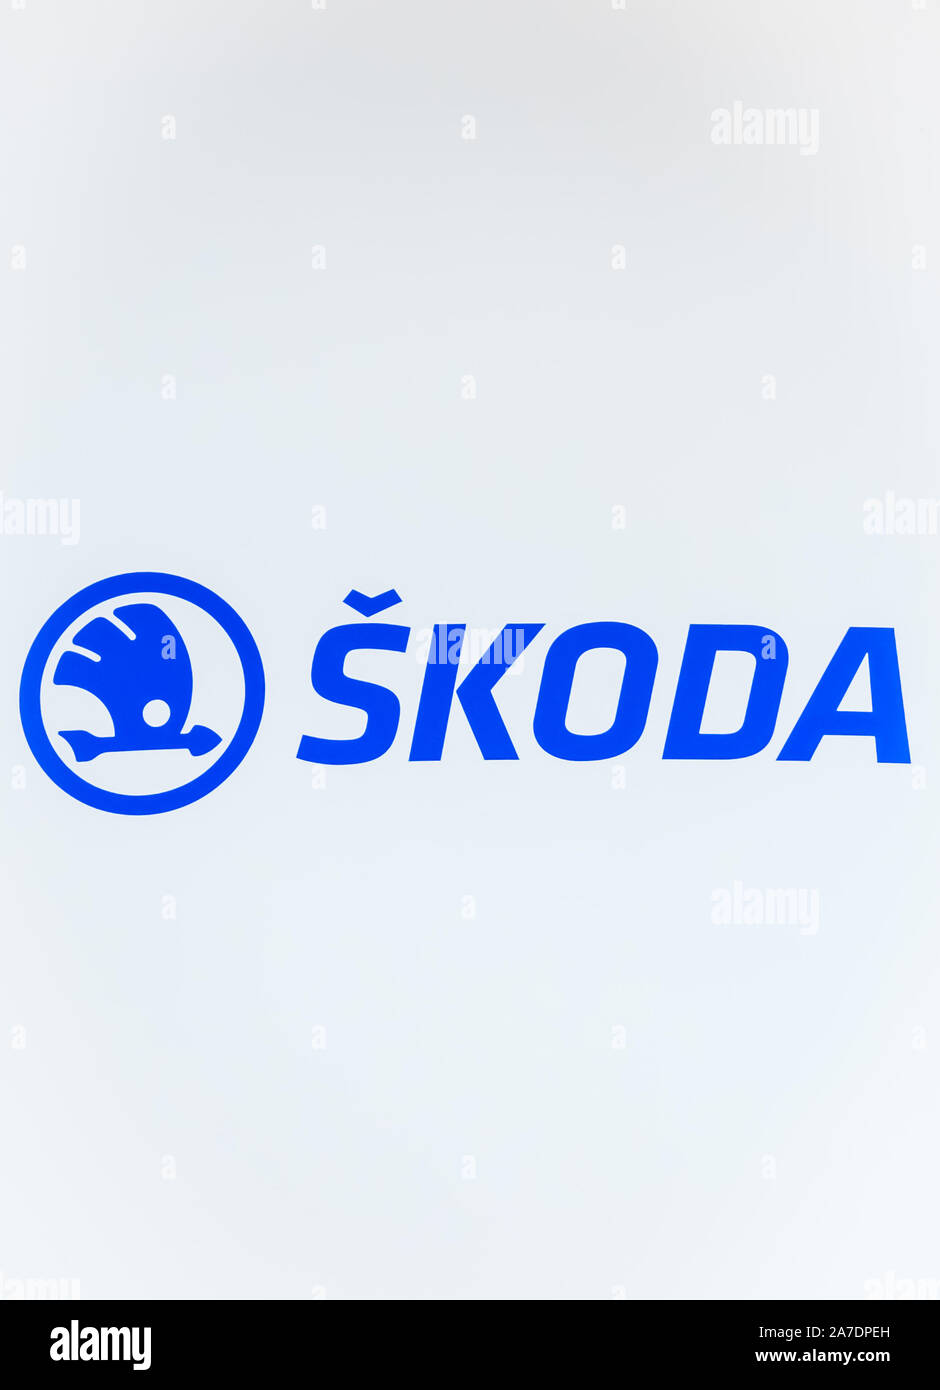 Pilsen, Czechia - Oct 28, 2019: The original blue logo of Skoda photographed with a white wall background. Skoda is car manufacturer from the Czech Republic. The company produces busses or turbines. Stock Photo